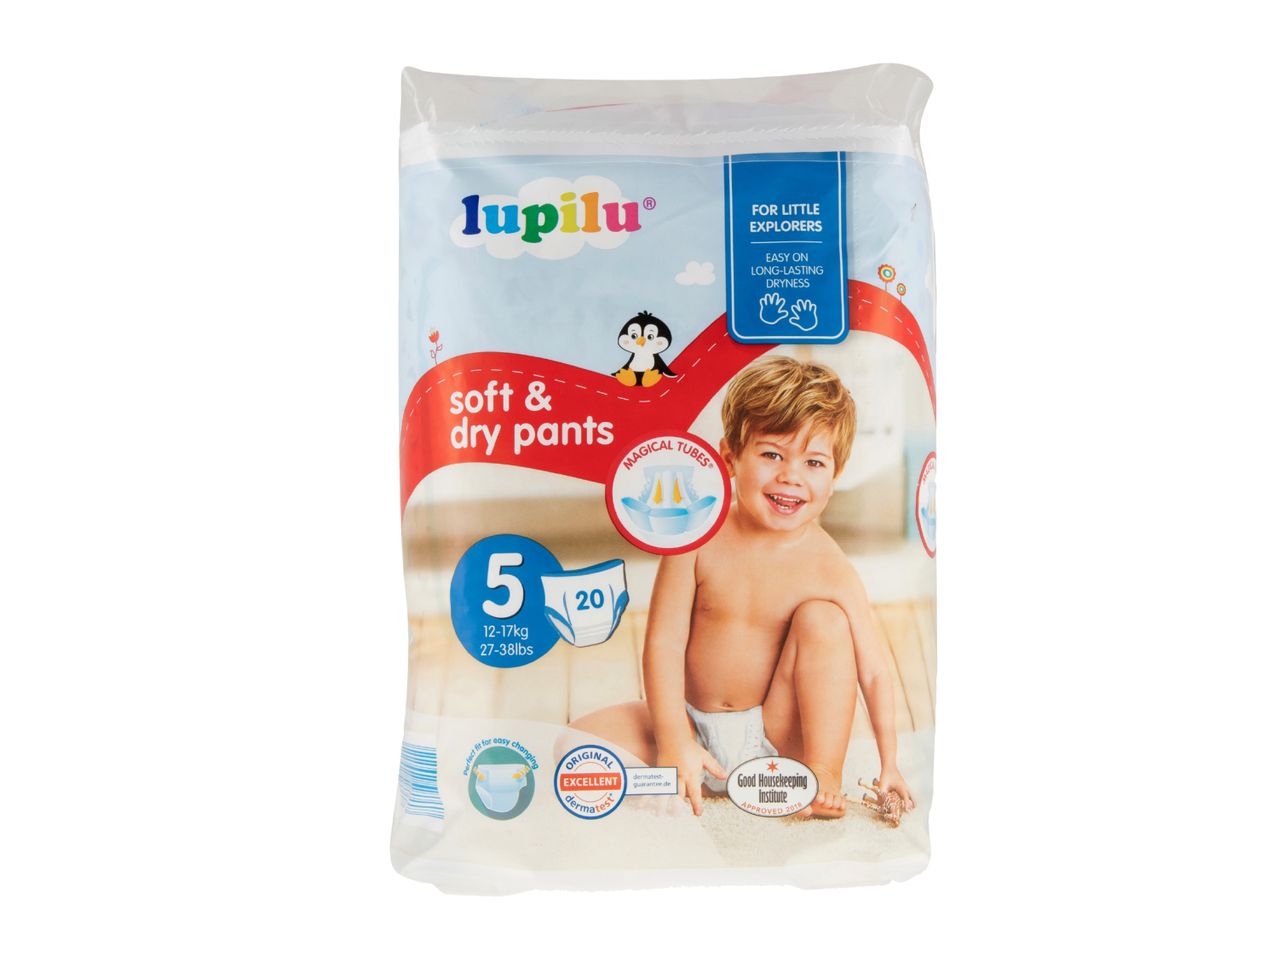 Go to full screen view: Baby Pants Junior Size 5 12-17kg - Image 1